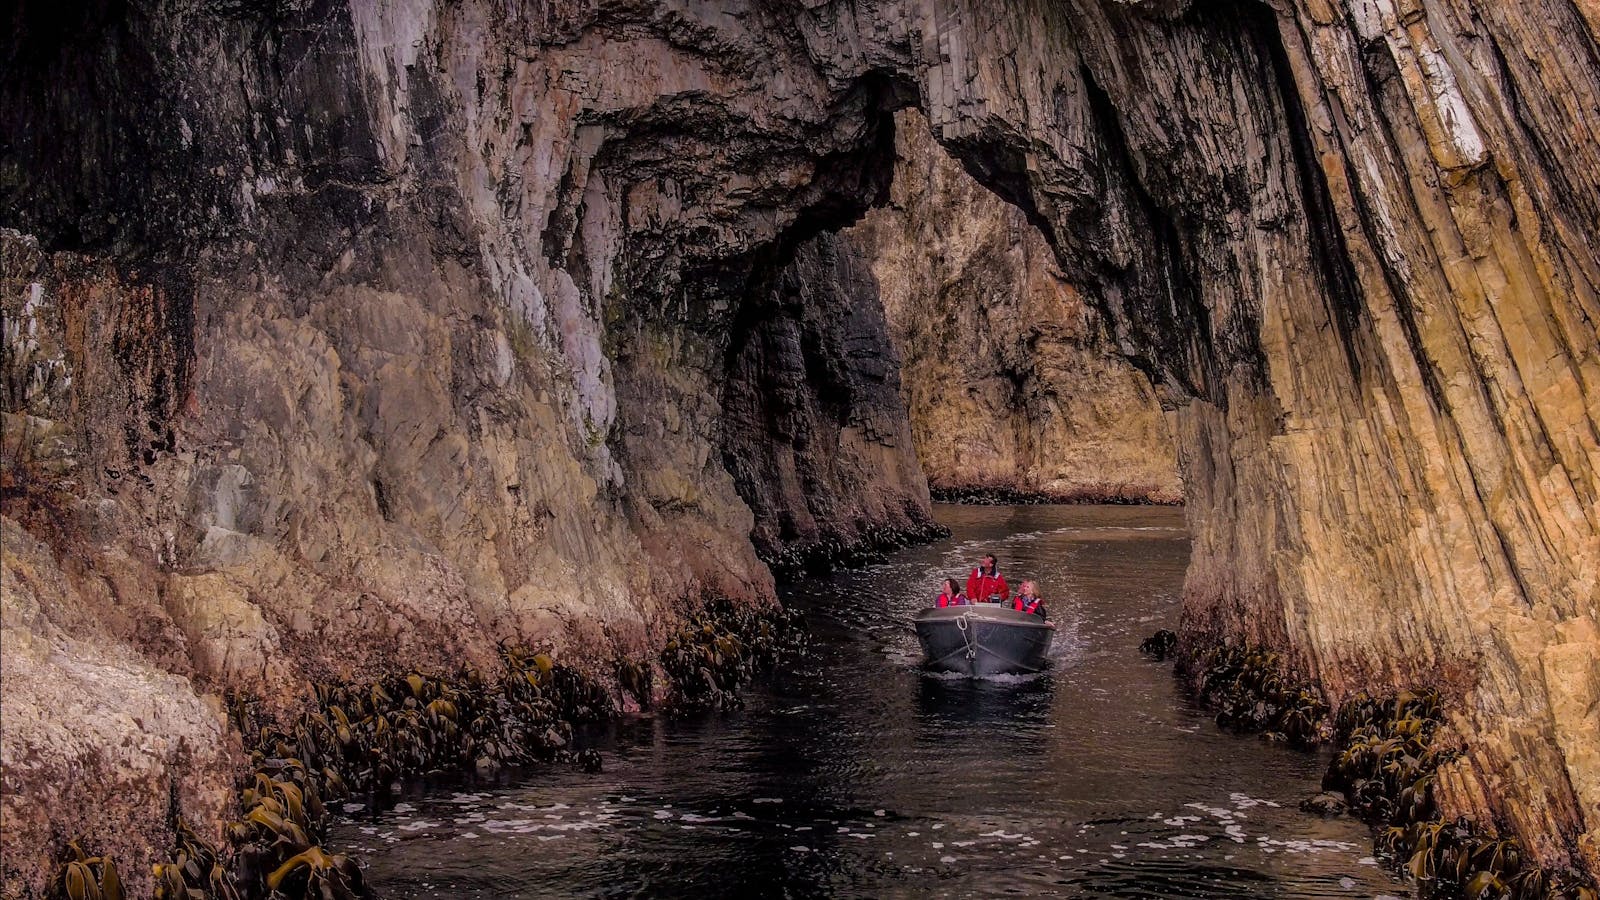 Explore a network of sea caves in our tender vessel.